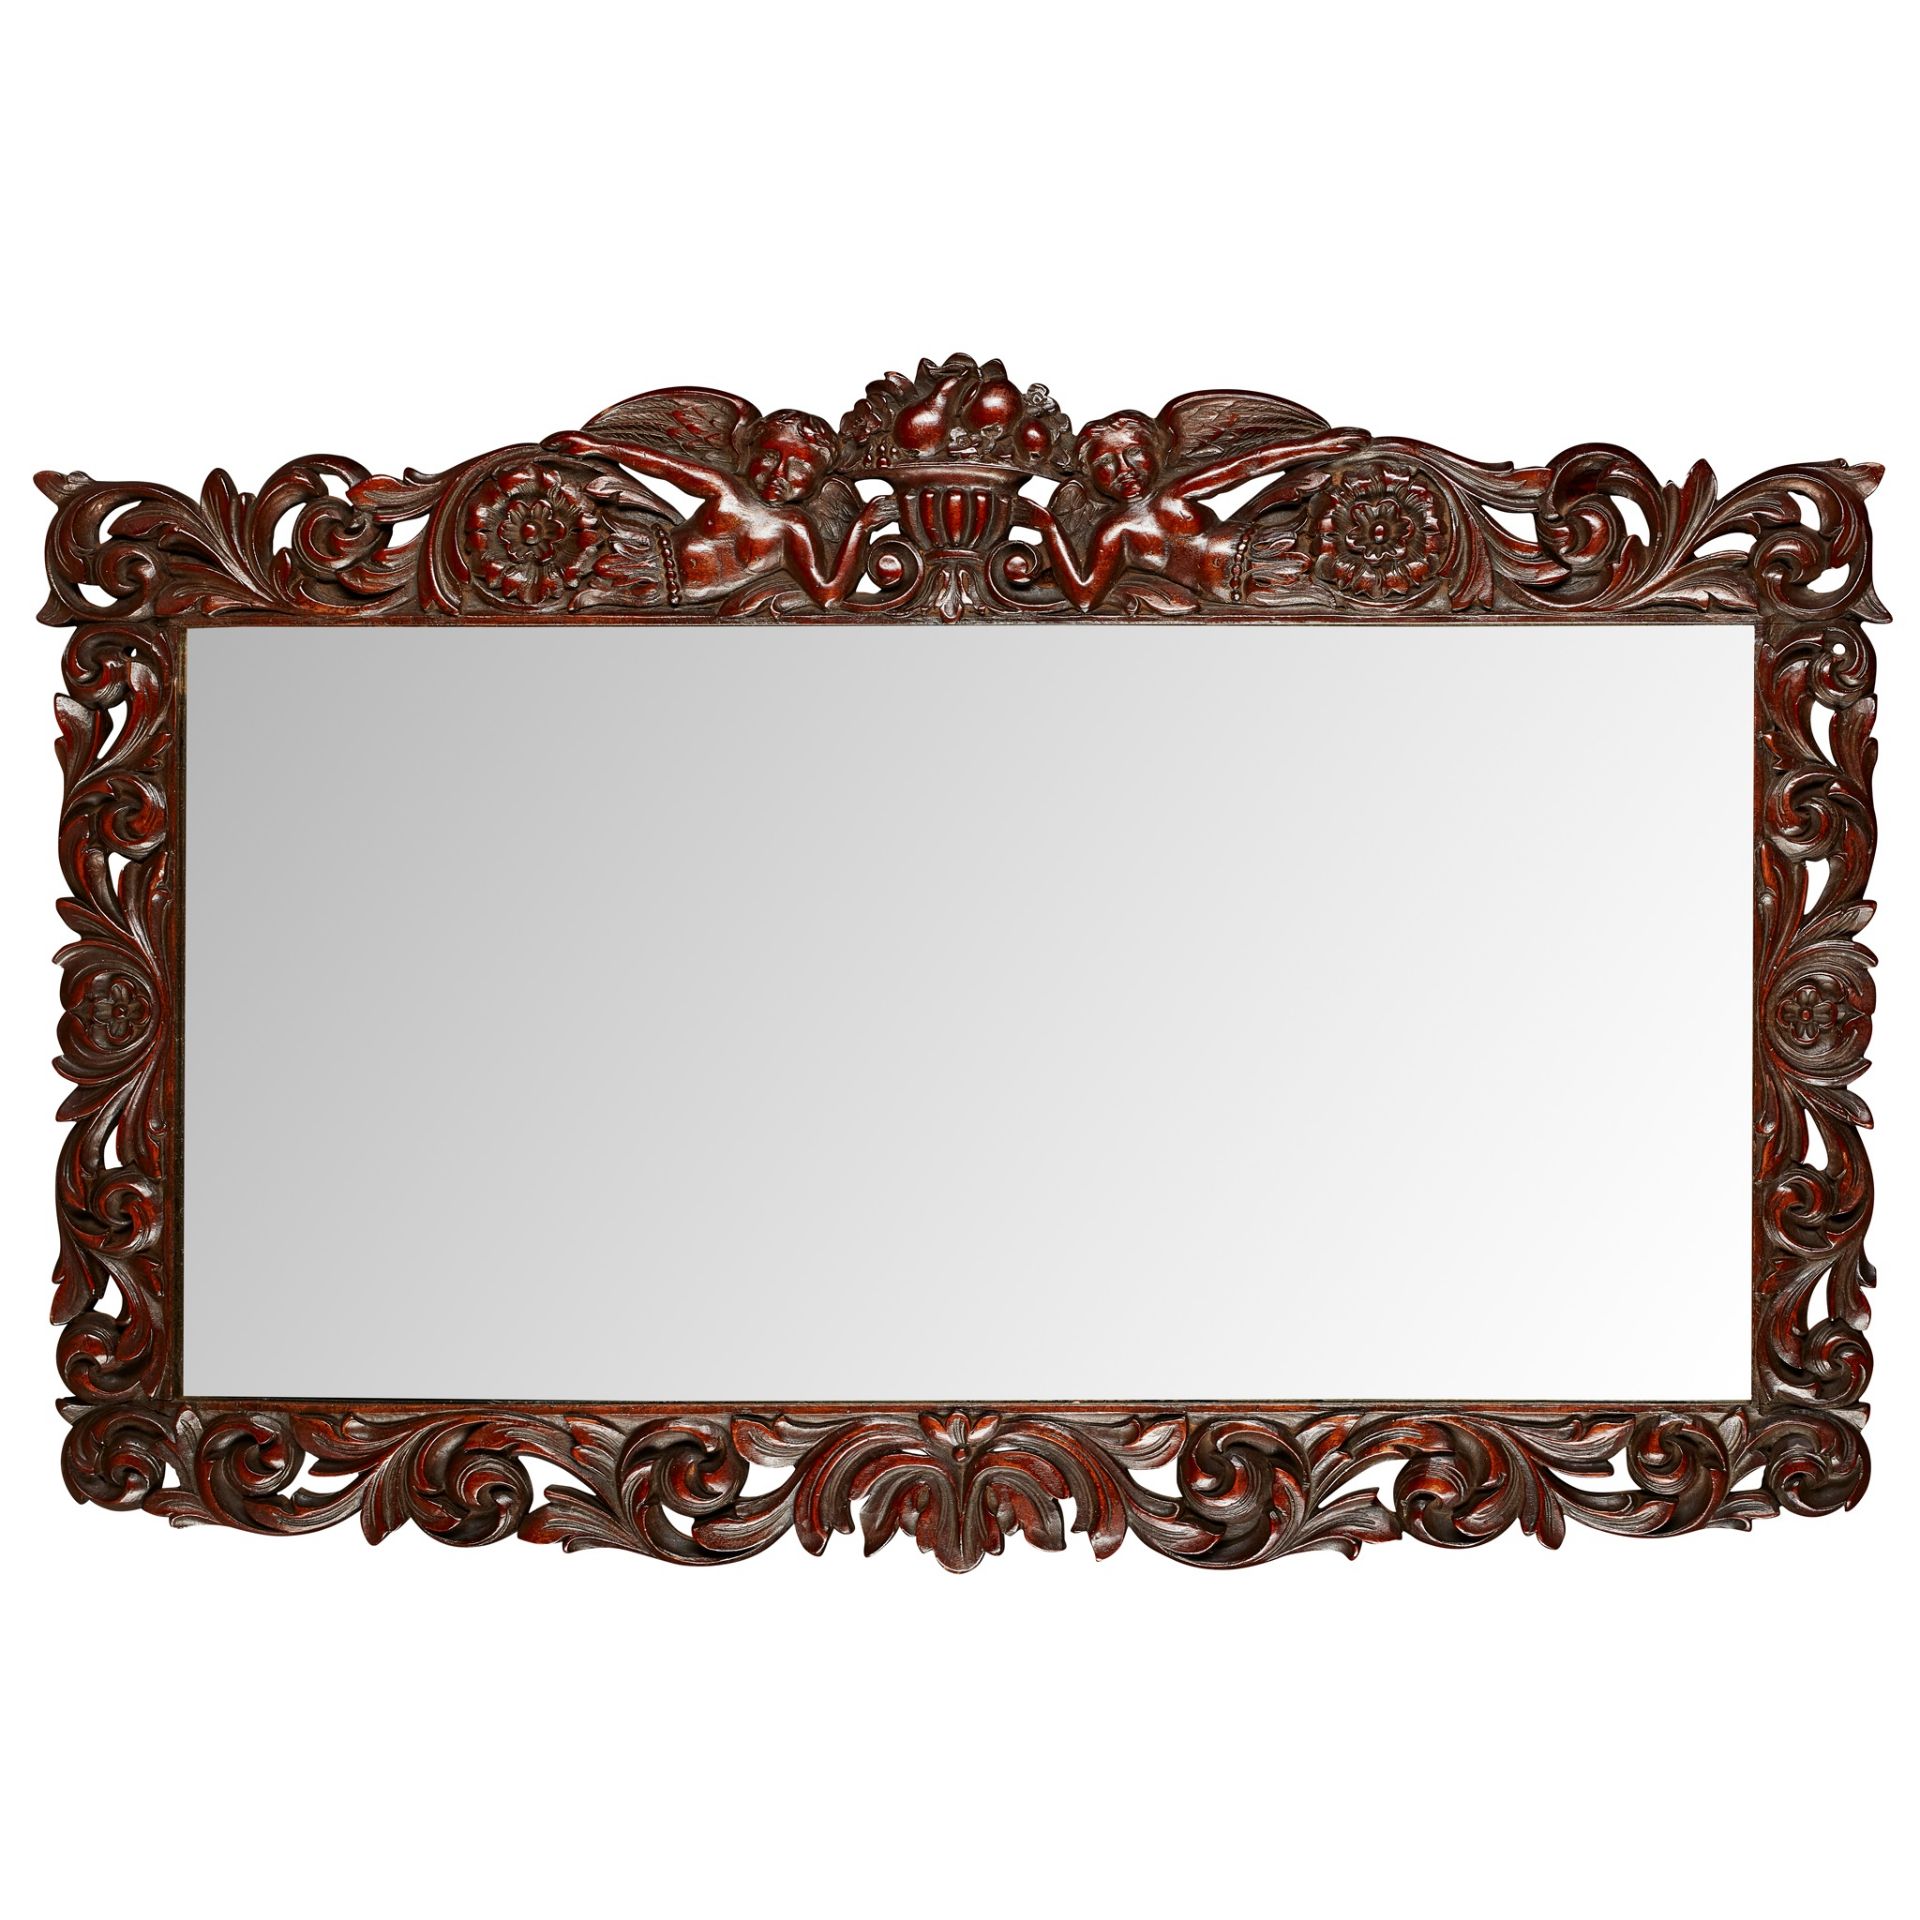 BAROQUE STYLE CARVED FRUITWOOD MIRROR 19TH CENTURY